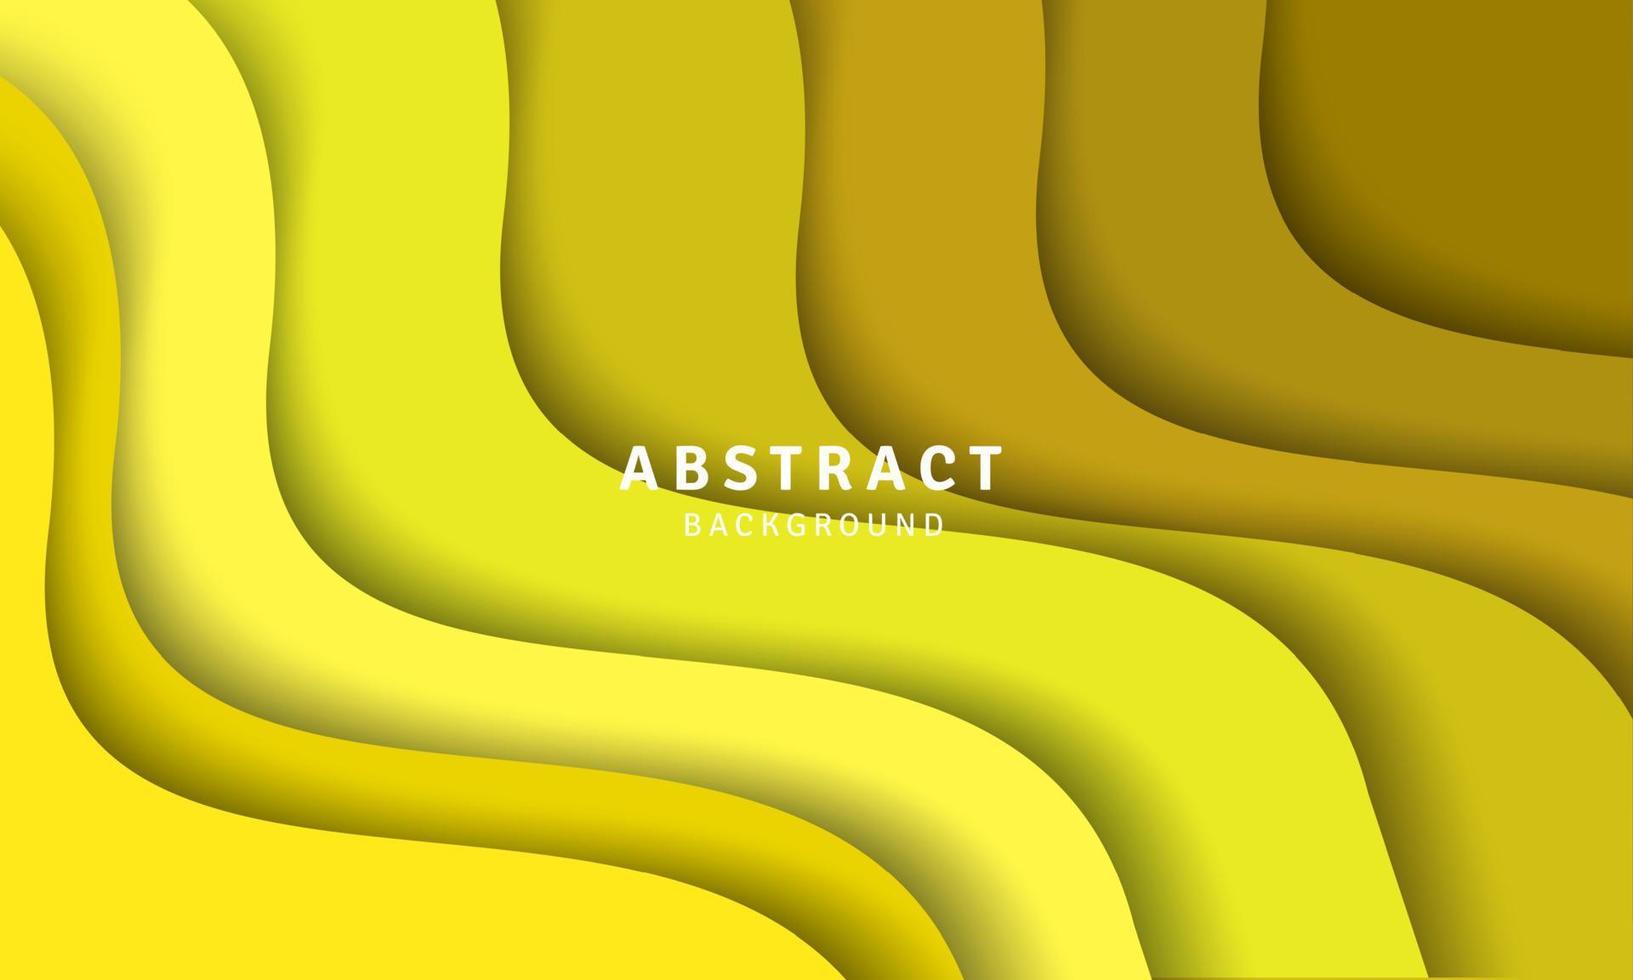 Wavy yellow shapes abstract background Design vector